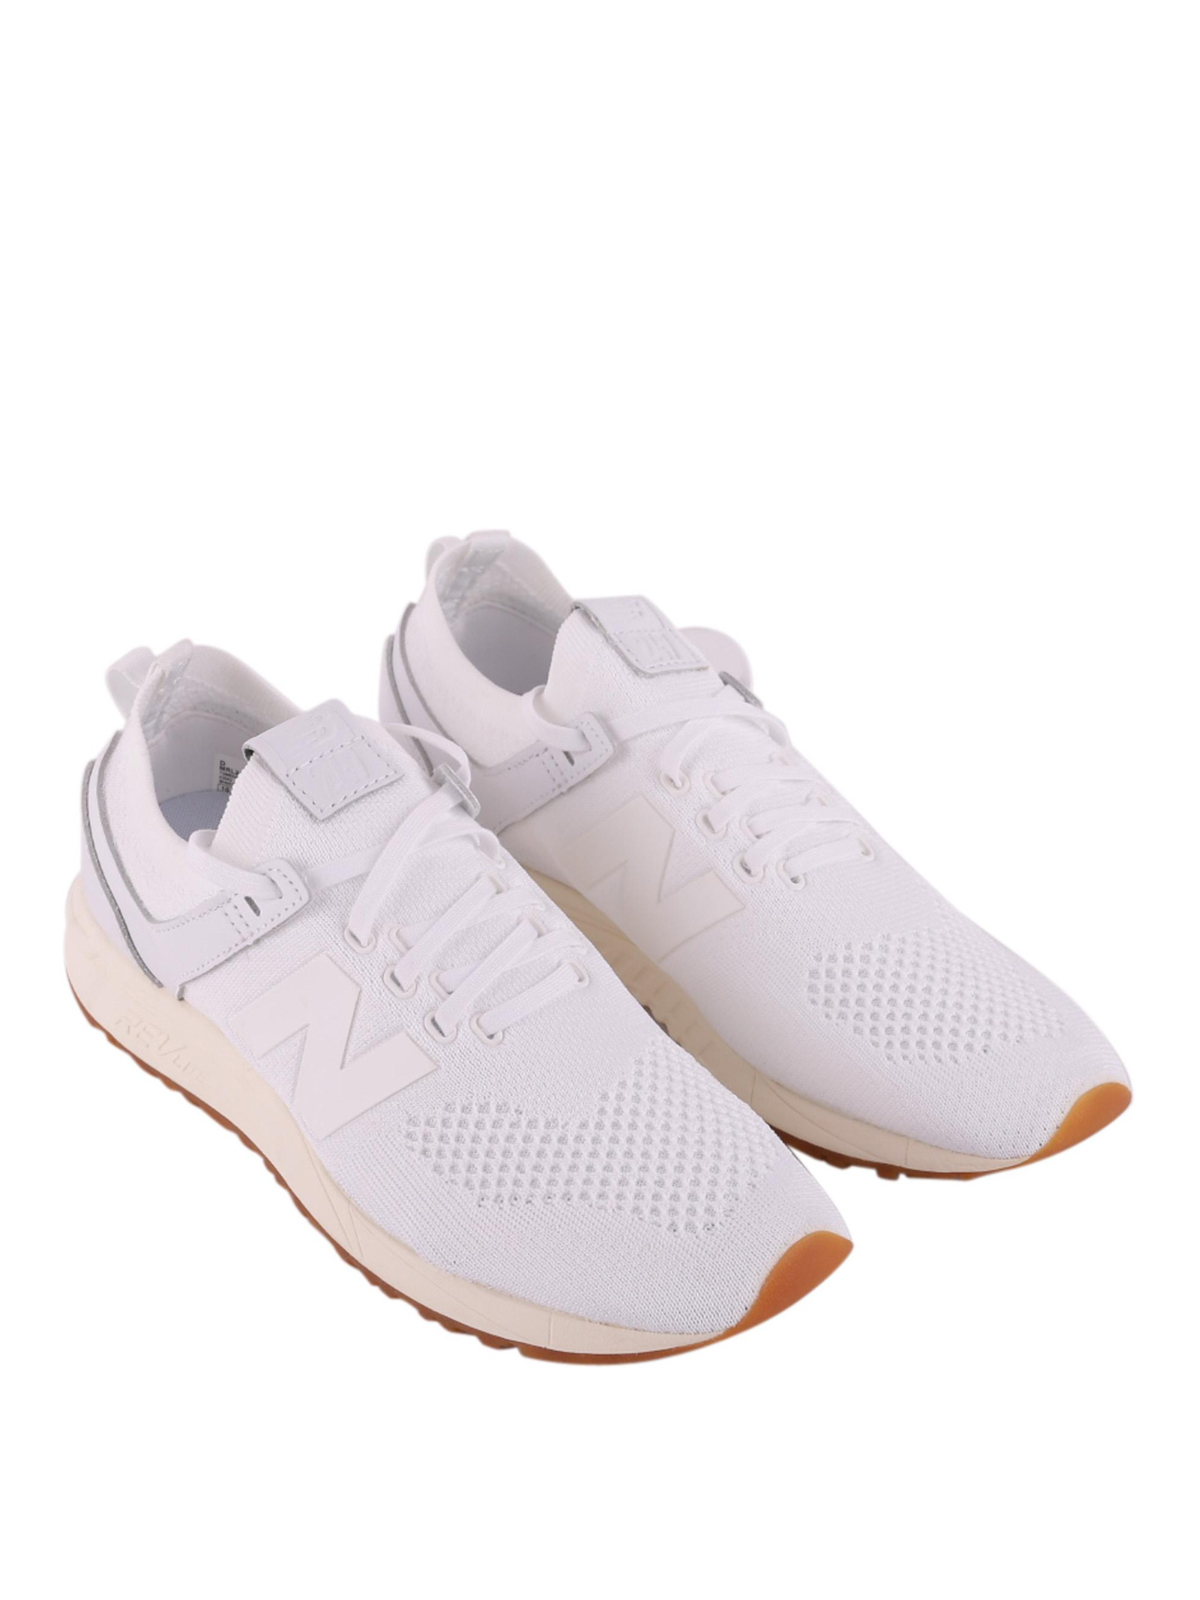 recorder Wander Get acquainted Trainers New Balance - 247 Decon white sneakers - MRL247DW | iKRIX.com